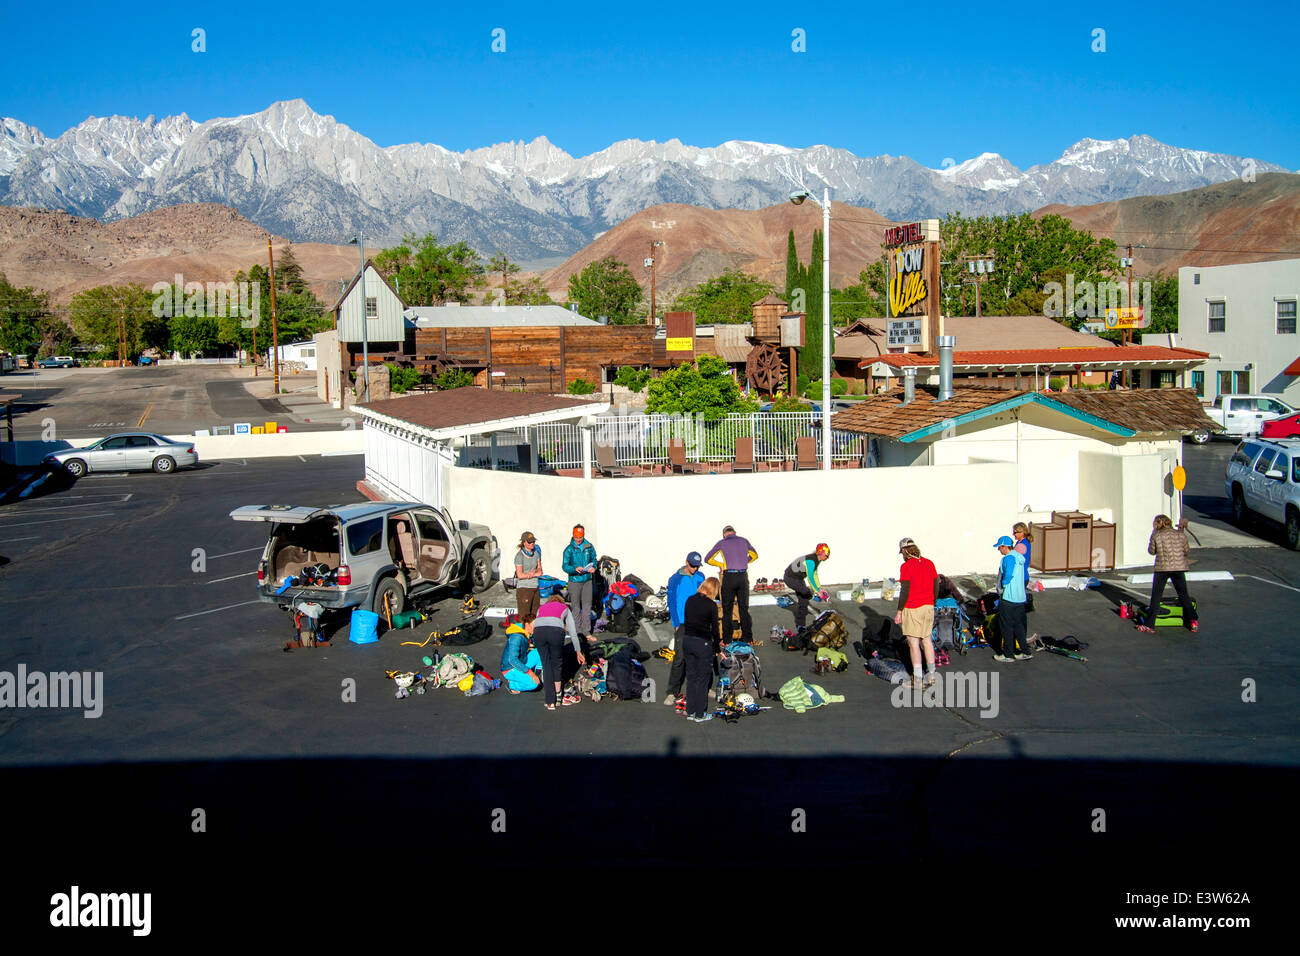 A rock climbing club gathers to organize their equipment before beginning an expedition in Lone Pine, CA. Note Sierra Nevada mountains in background. Stock Photo